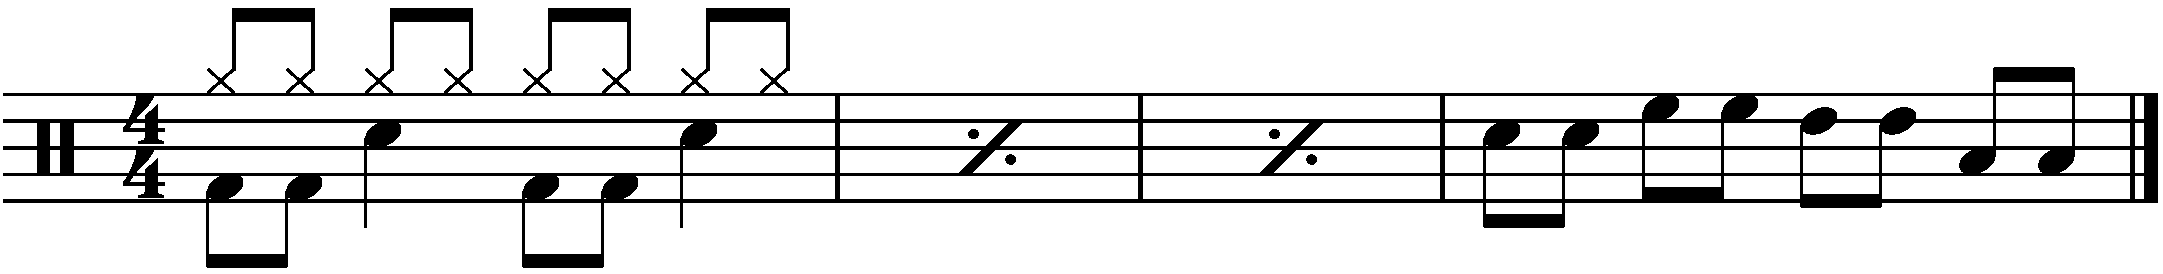 Swung Notation